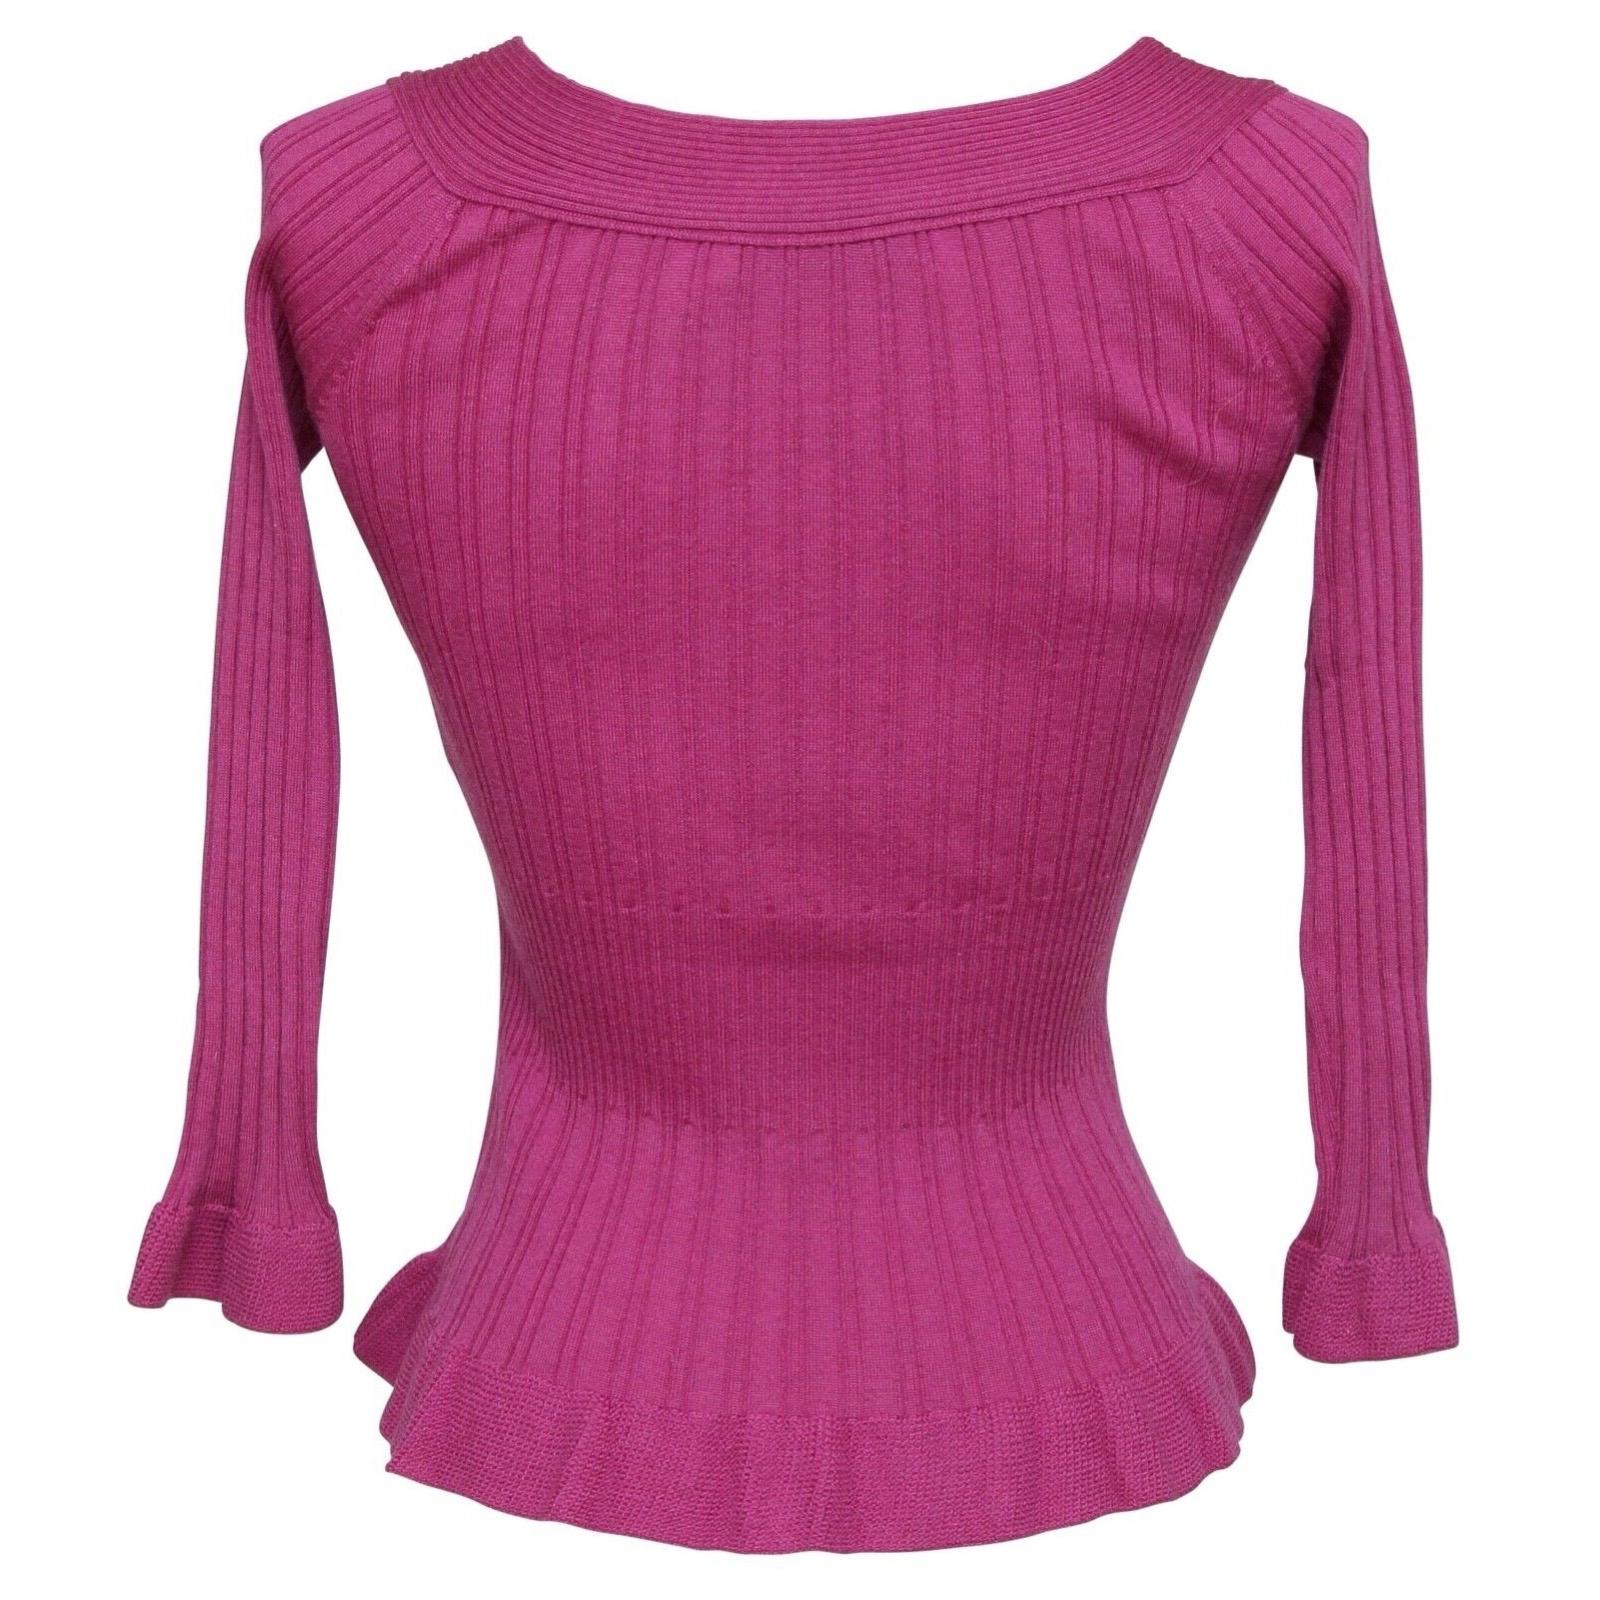 CHRISTIAN DIOR Sweater Knit Top Magenta Scoop Neck Tie 3/4 Sleeve Sz 36 4 In Excellent Condition For Sale In Hollywood, FL